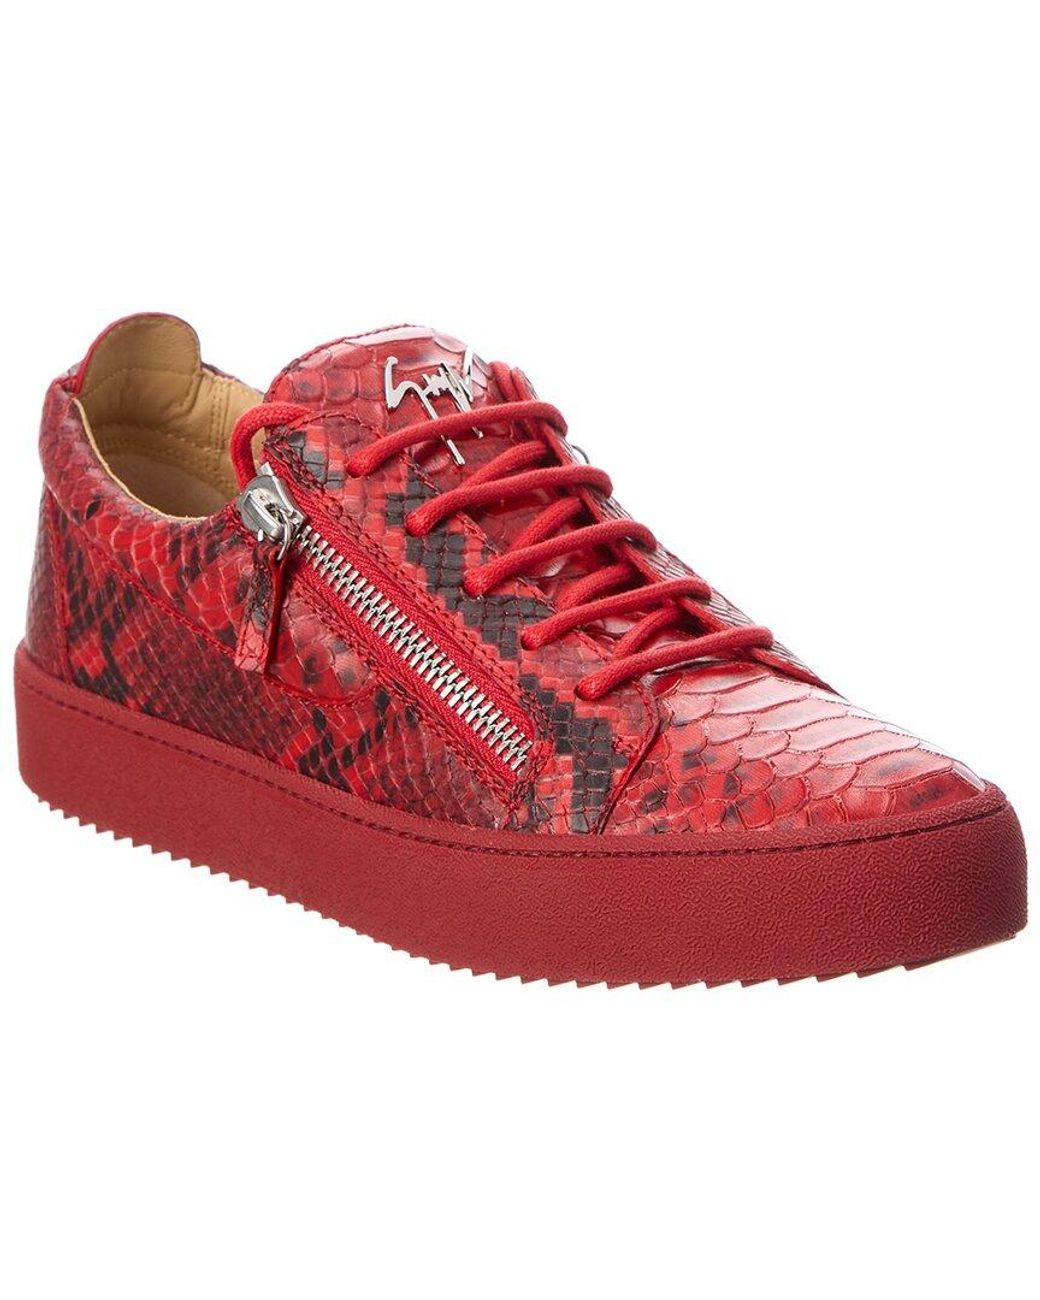 Reception Nysgerrighed Kammer Giuseppe Zanotti May London Snake-embossed Leather Sneaker in Red for Men |  Lyst